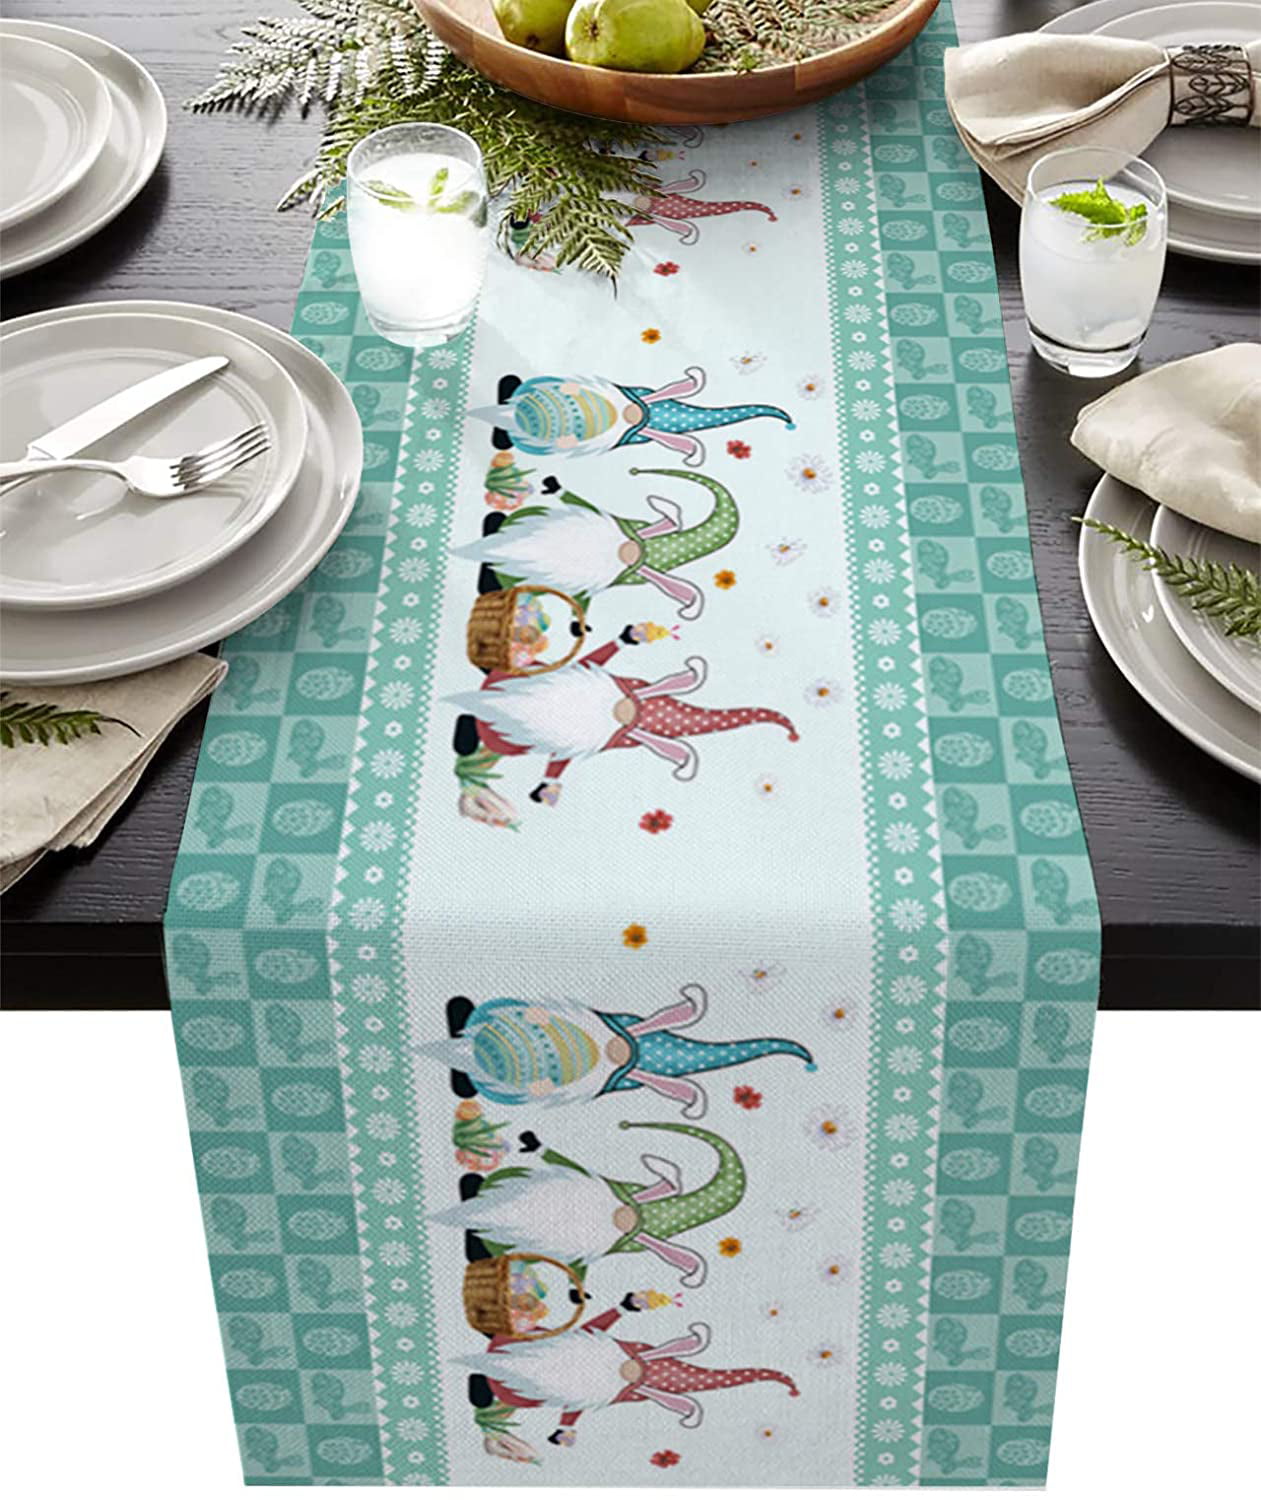 Coffee Table Runner Spring Easter Gnome Eggs Teal Green Buffalo Check Plaid Farmhouse Burlap Table Runner For Holiday Family Dinner Parties Gathering 13x90inch Walmart Com Walmart Com